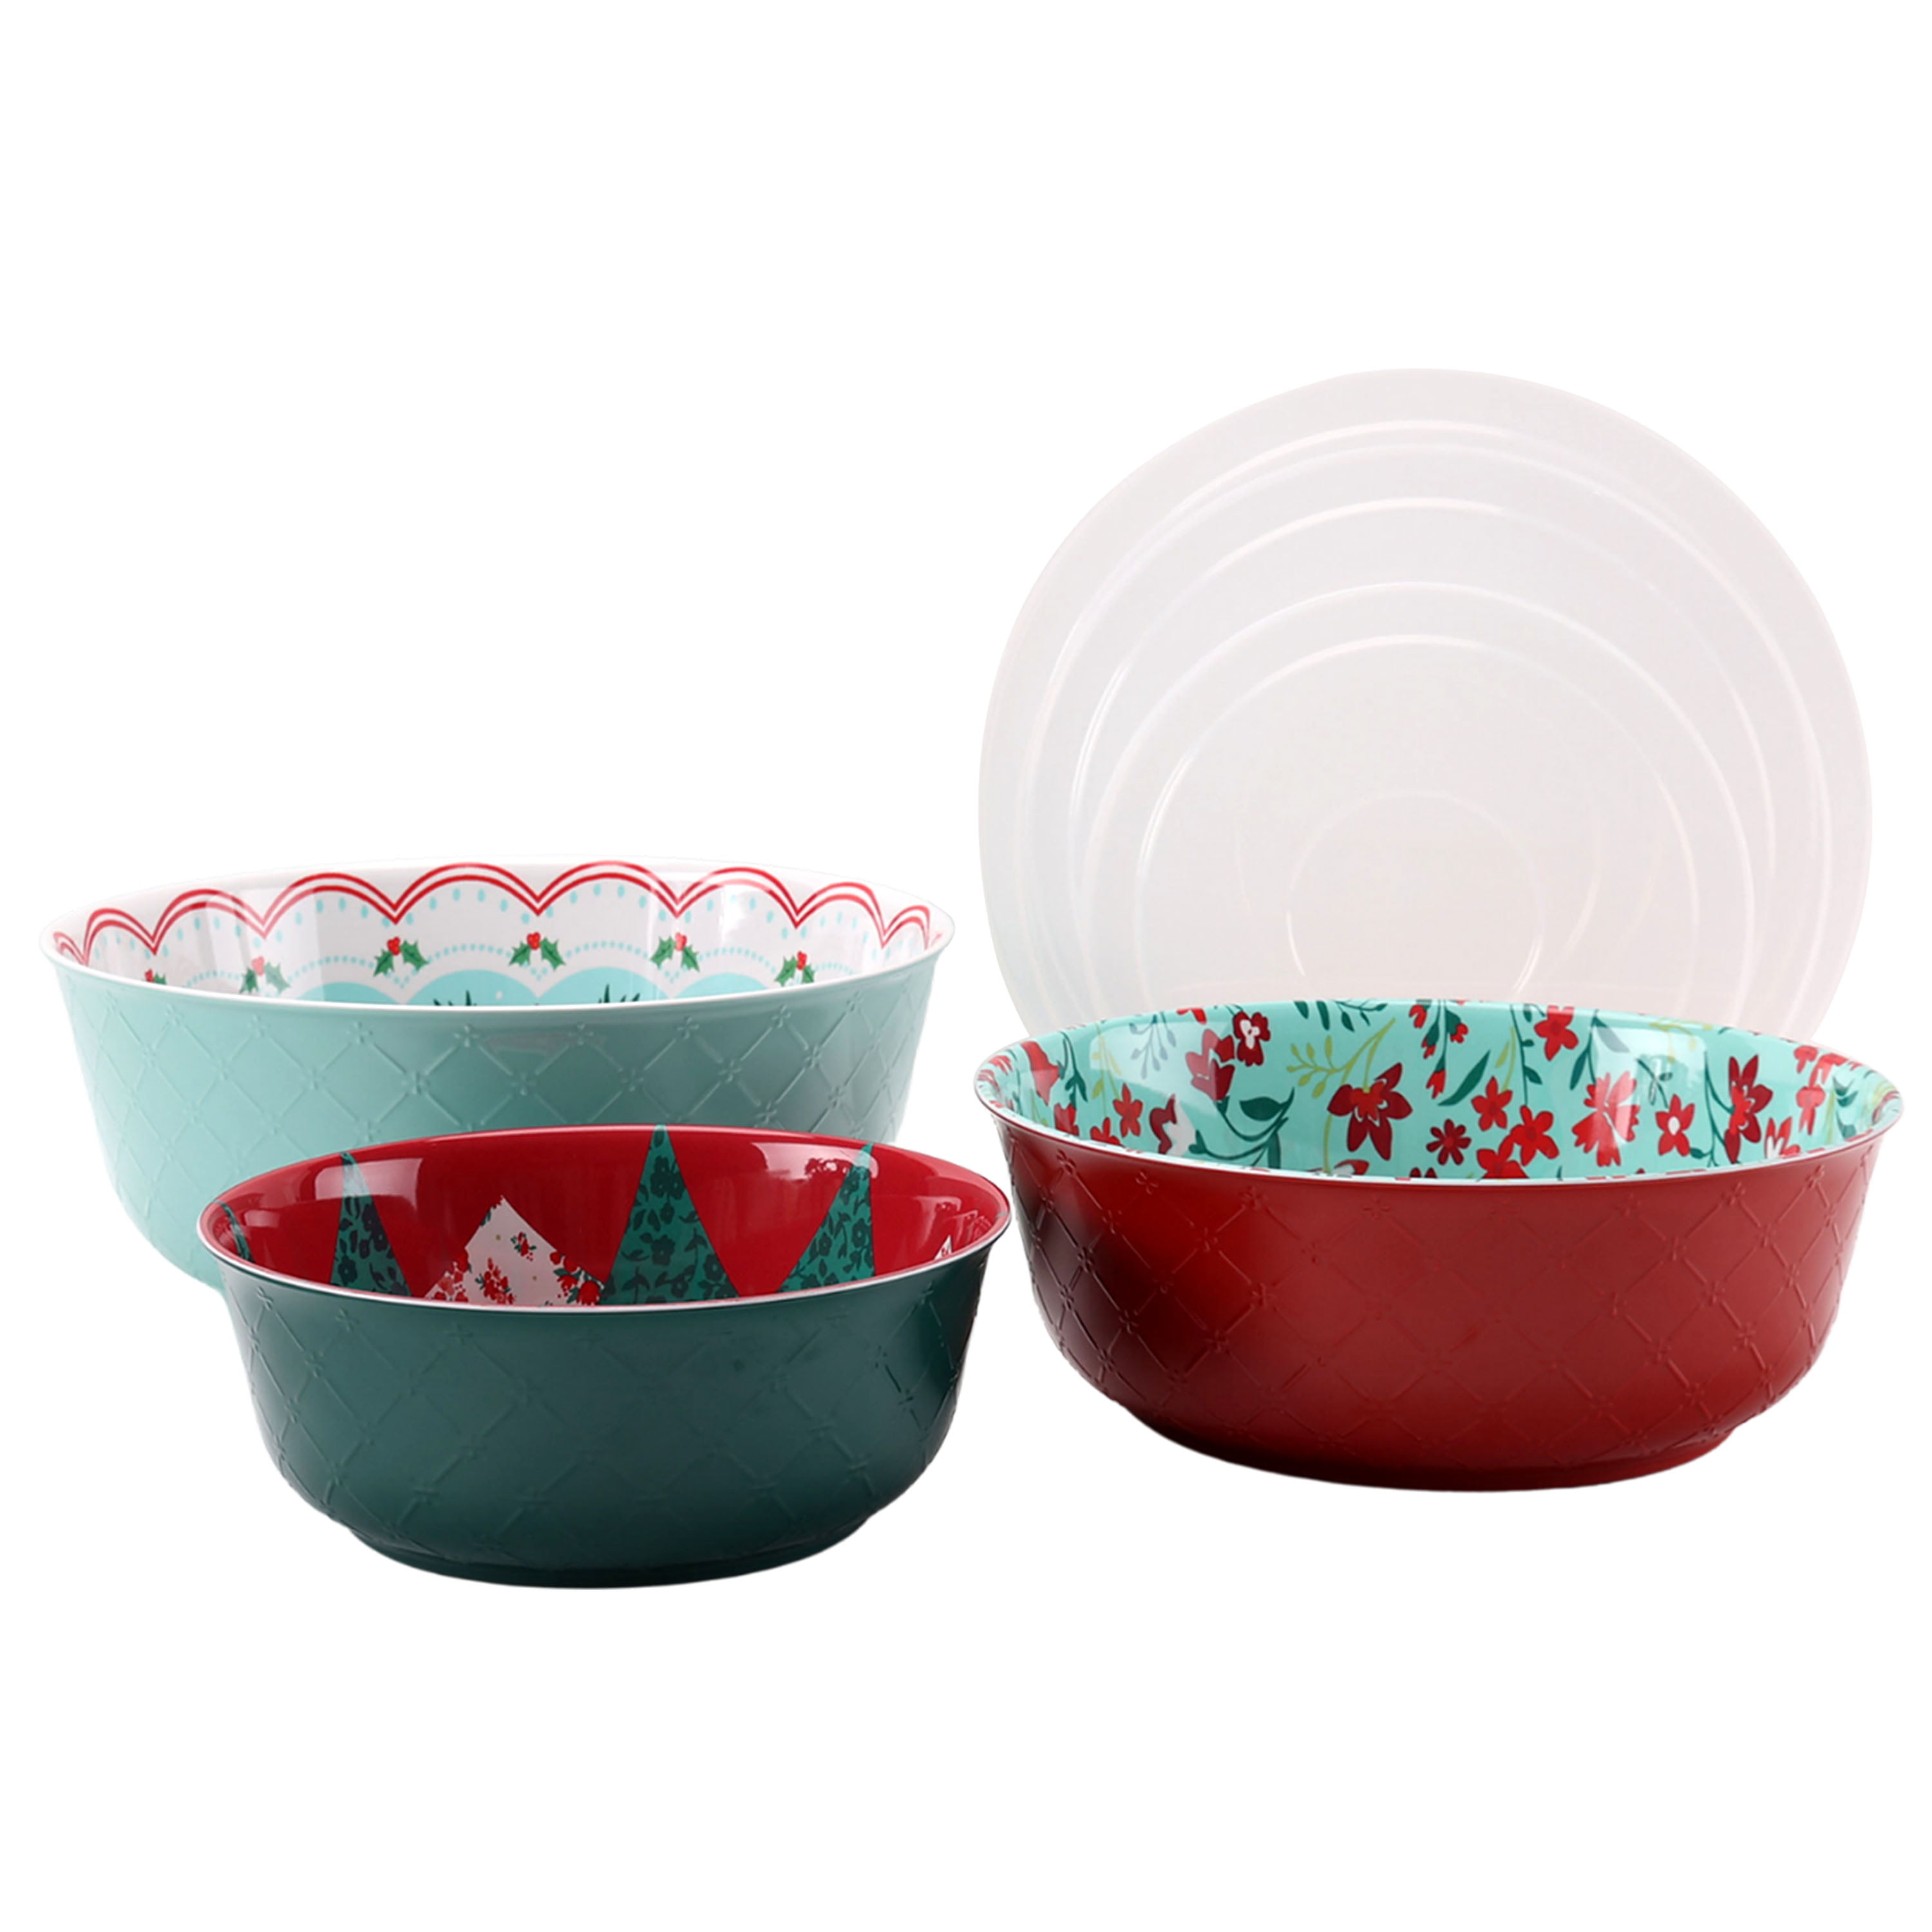 Buy The Pioneer Woman mazie 3 piece mixing bowl set blue and red Online